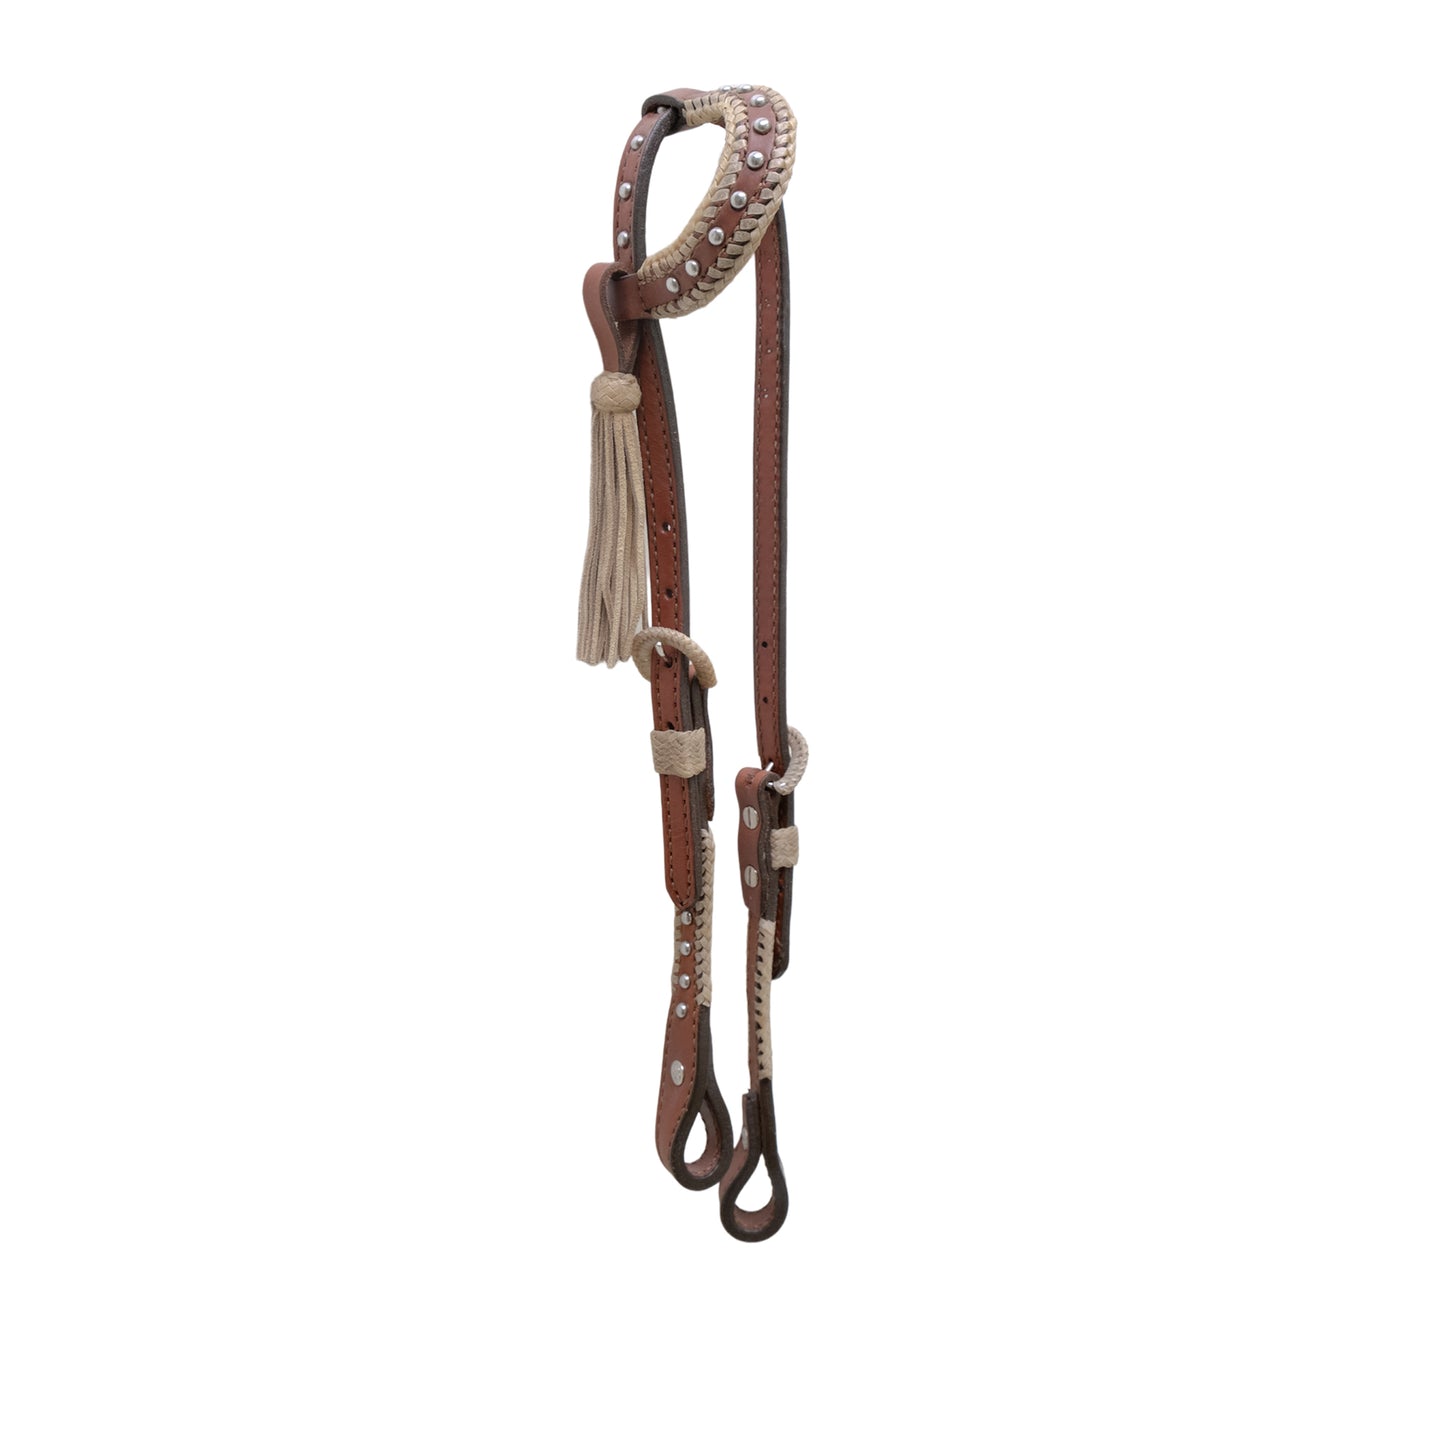 5/8" Flat one ear headstall toast leather with rawhide Spanish lace, Spanish lace hardware, braided loops, and SS spots.